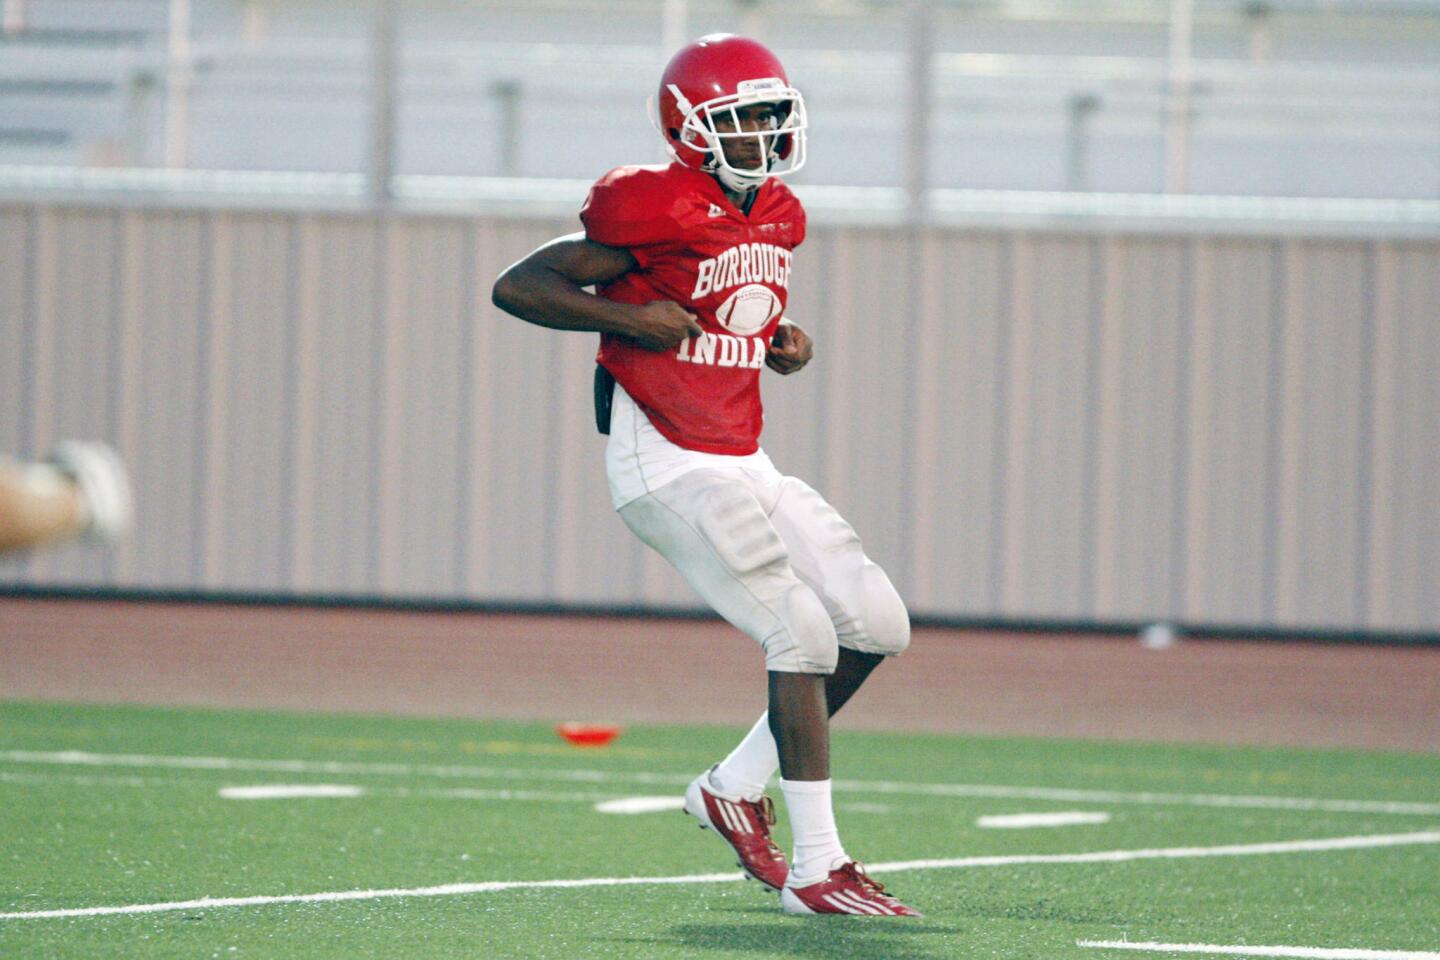 Burroughs' Oharjee Brown runs through a play during practice at John Burroughs High School in Burbank on Wedesday, August 15, 2012.